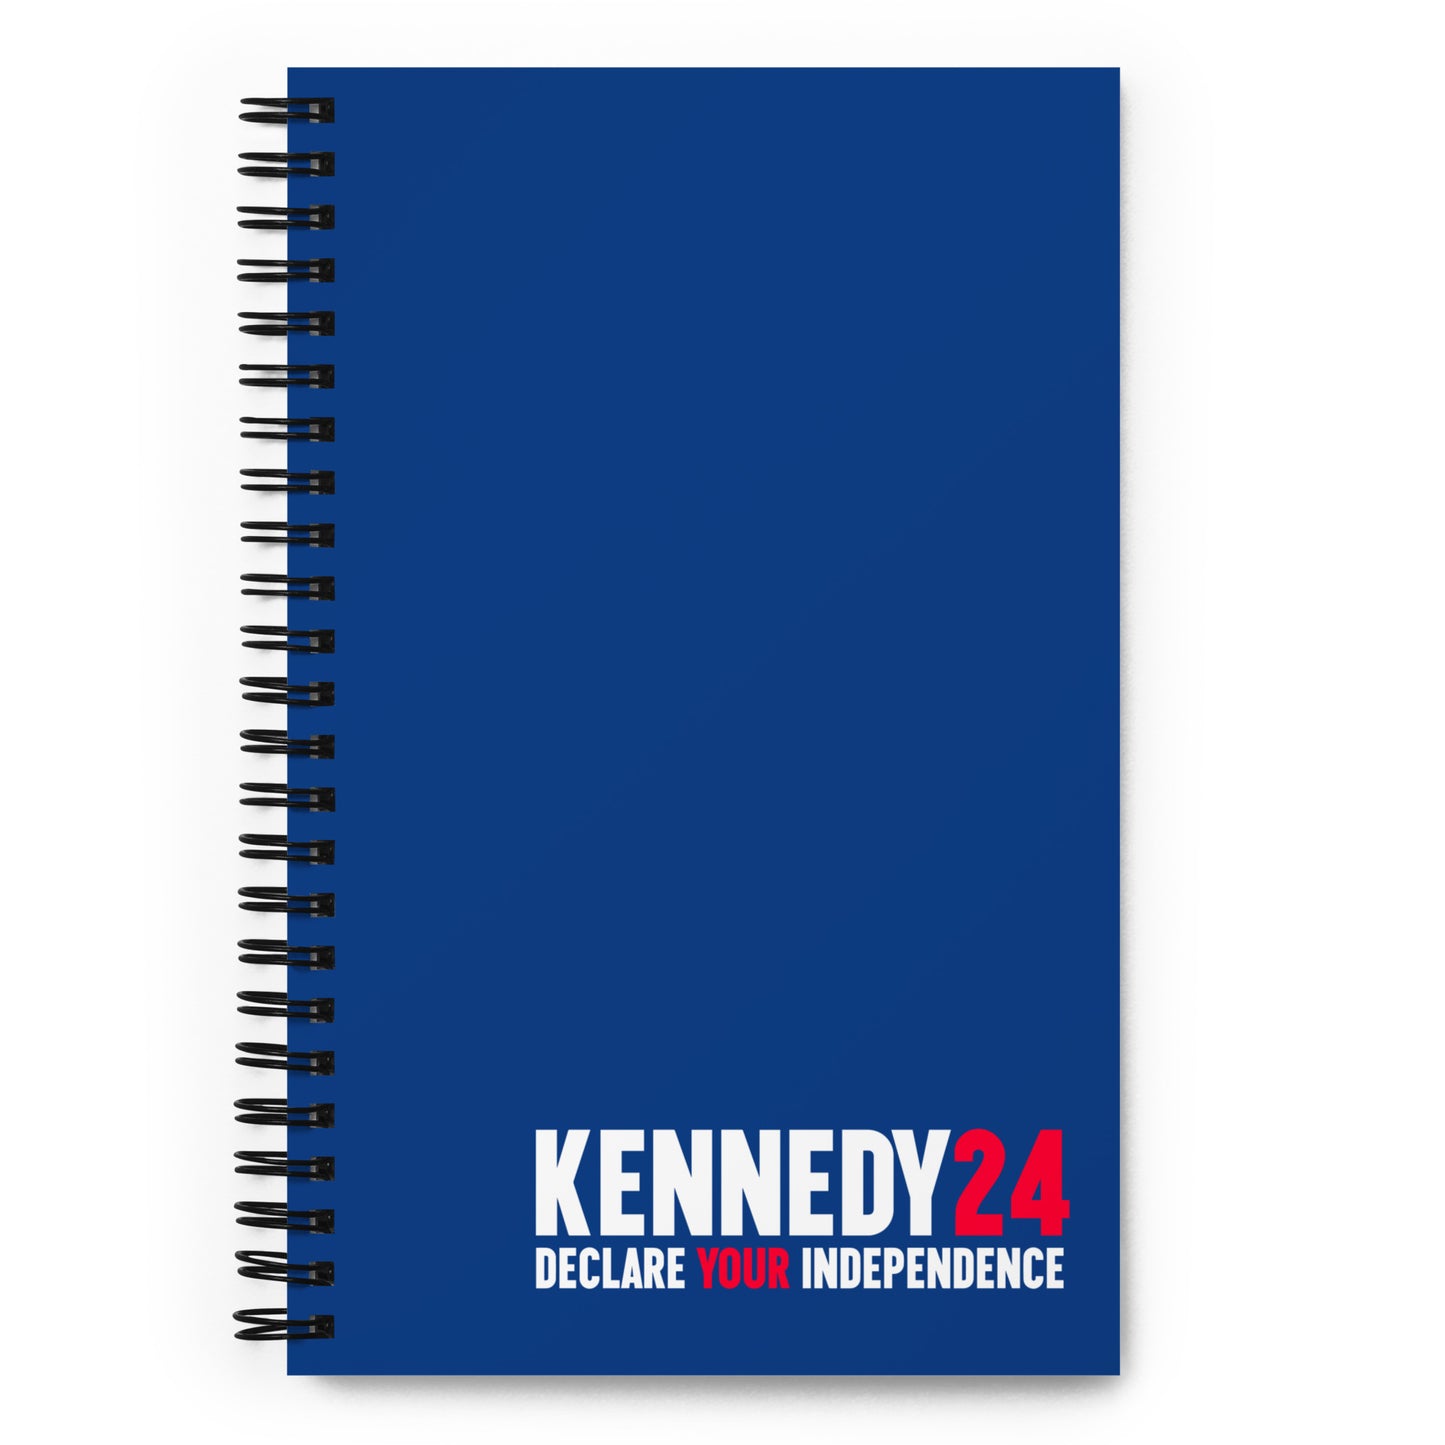 Front of the Kennedy24 navy blue spiral notebook